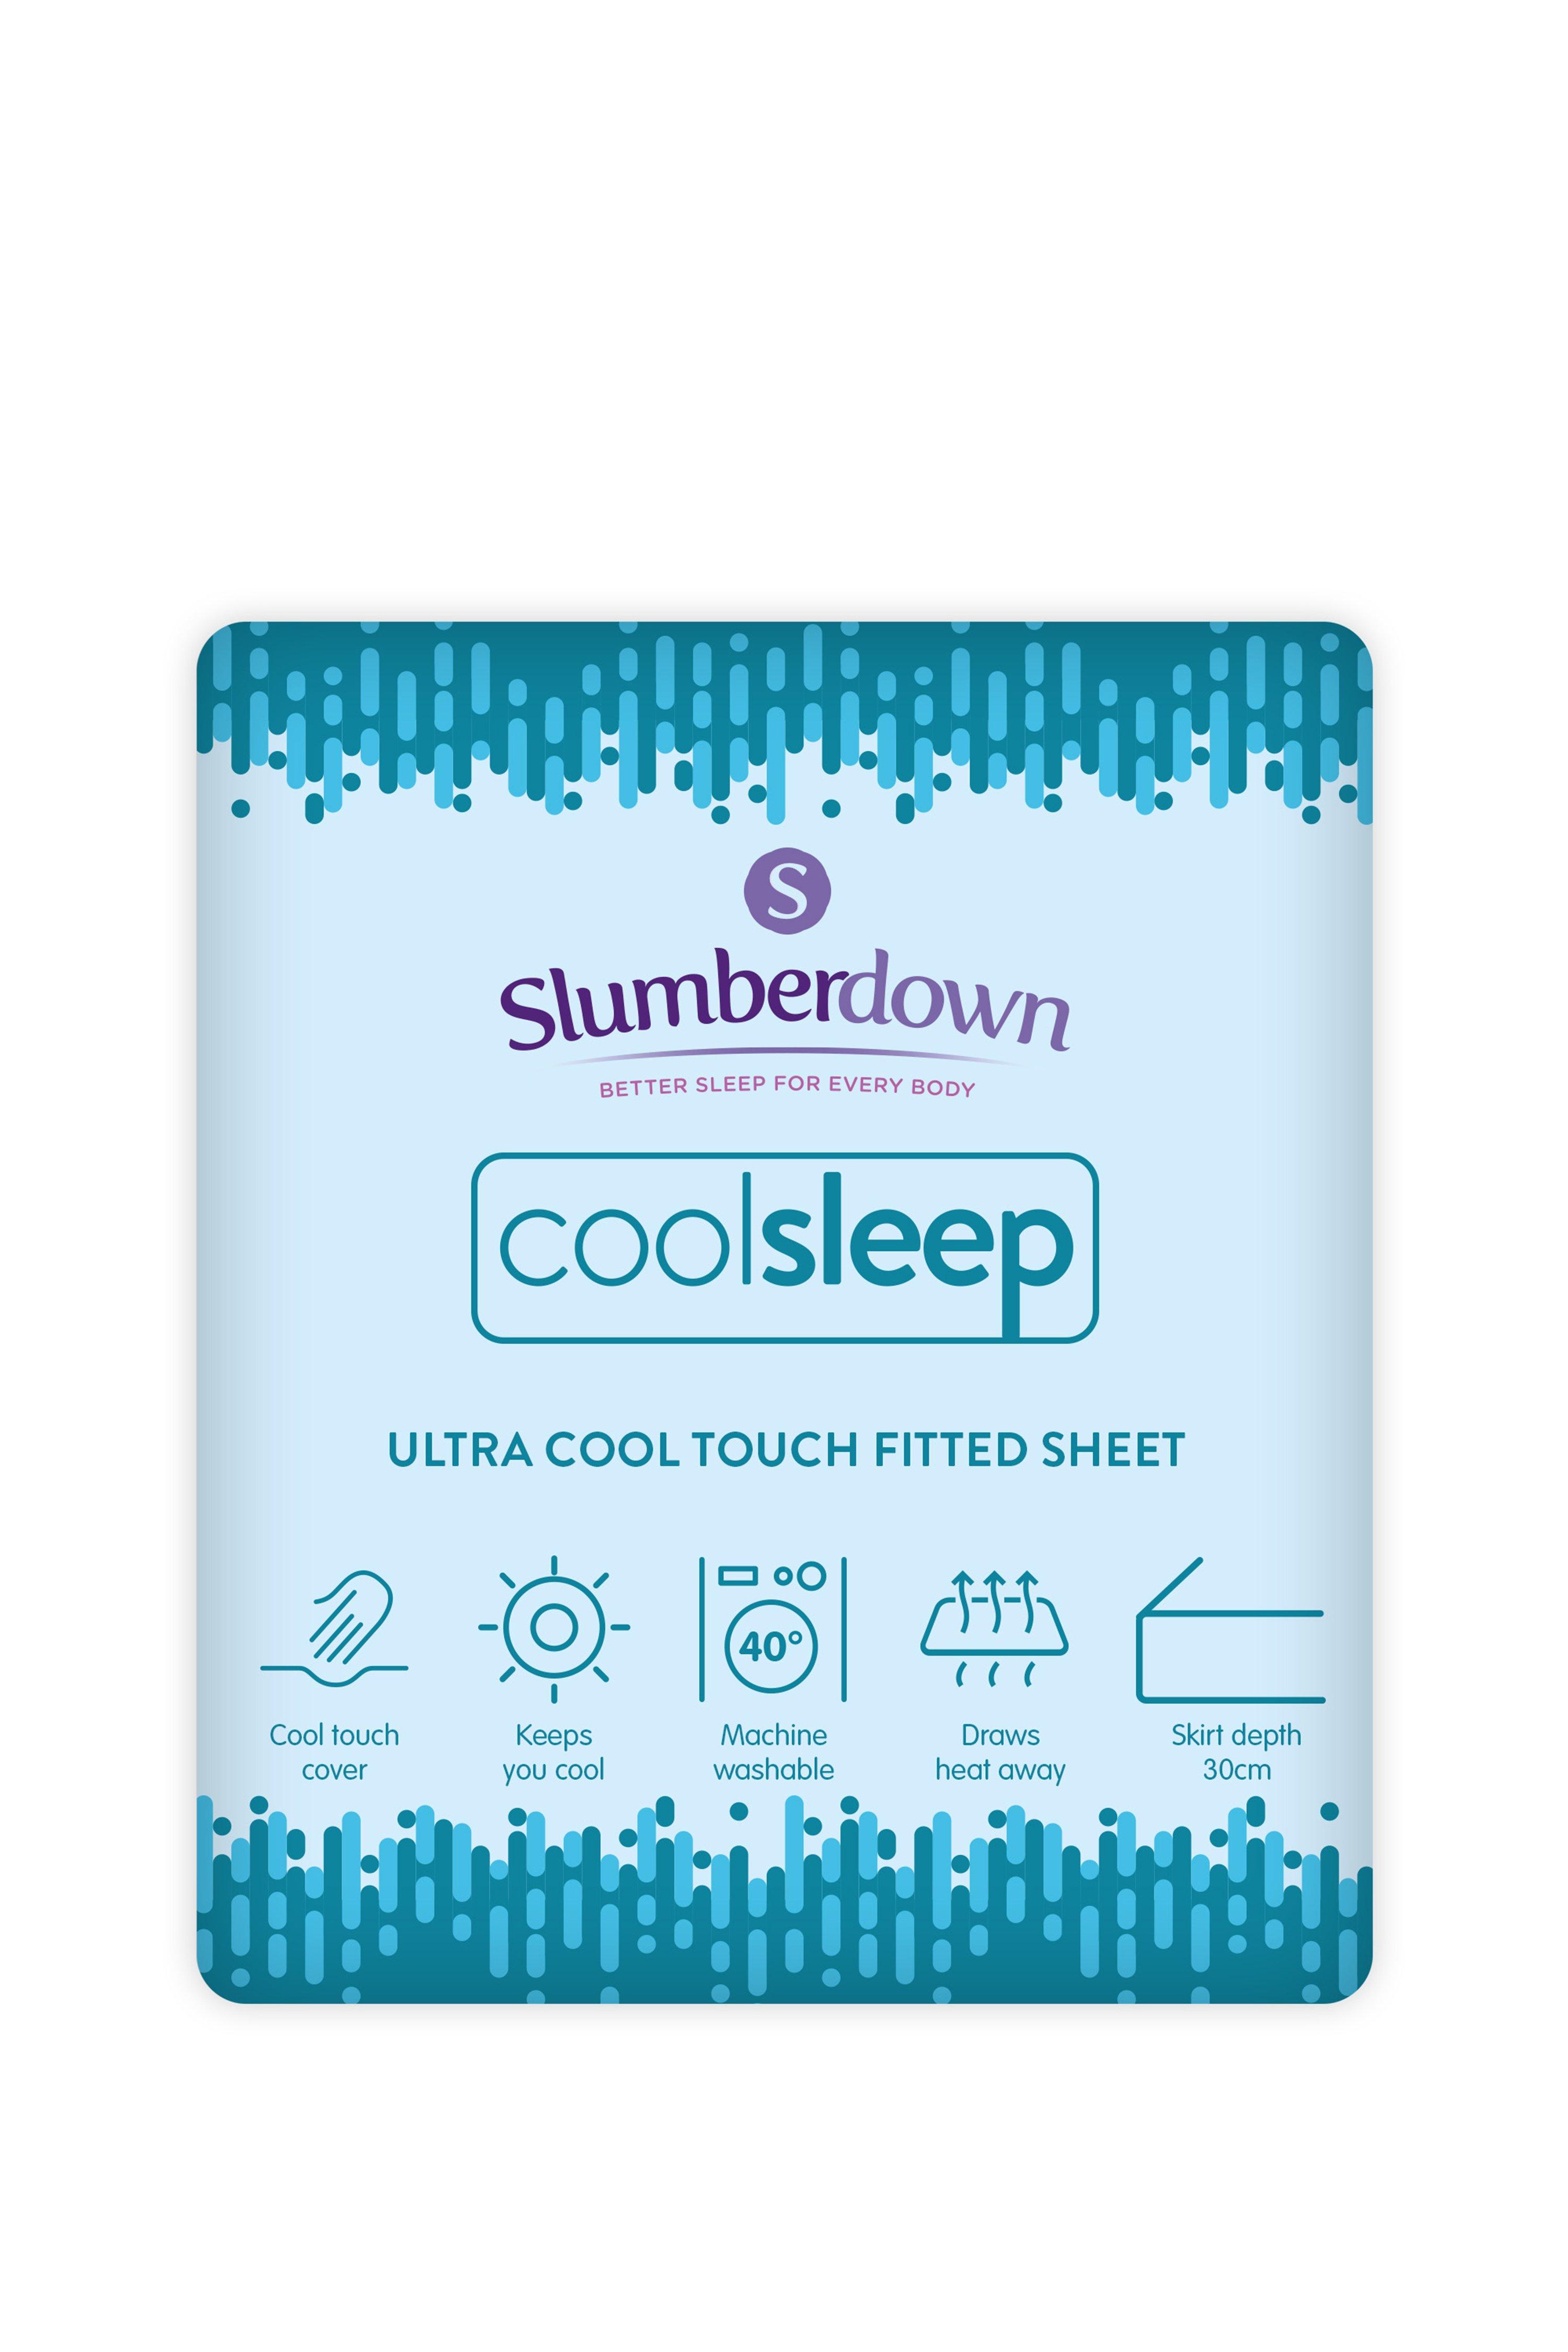 Cool Sleep Ultra Cool Fitted Sheet